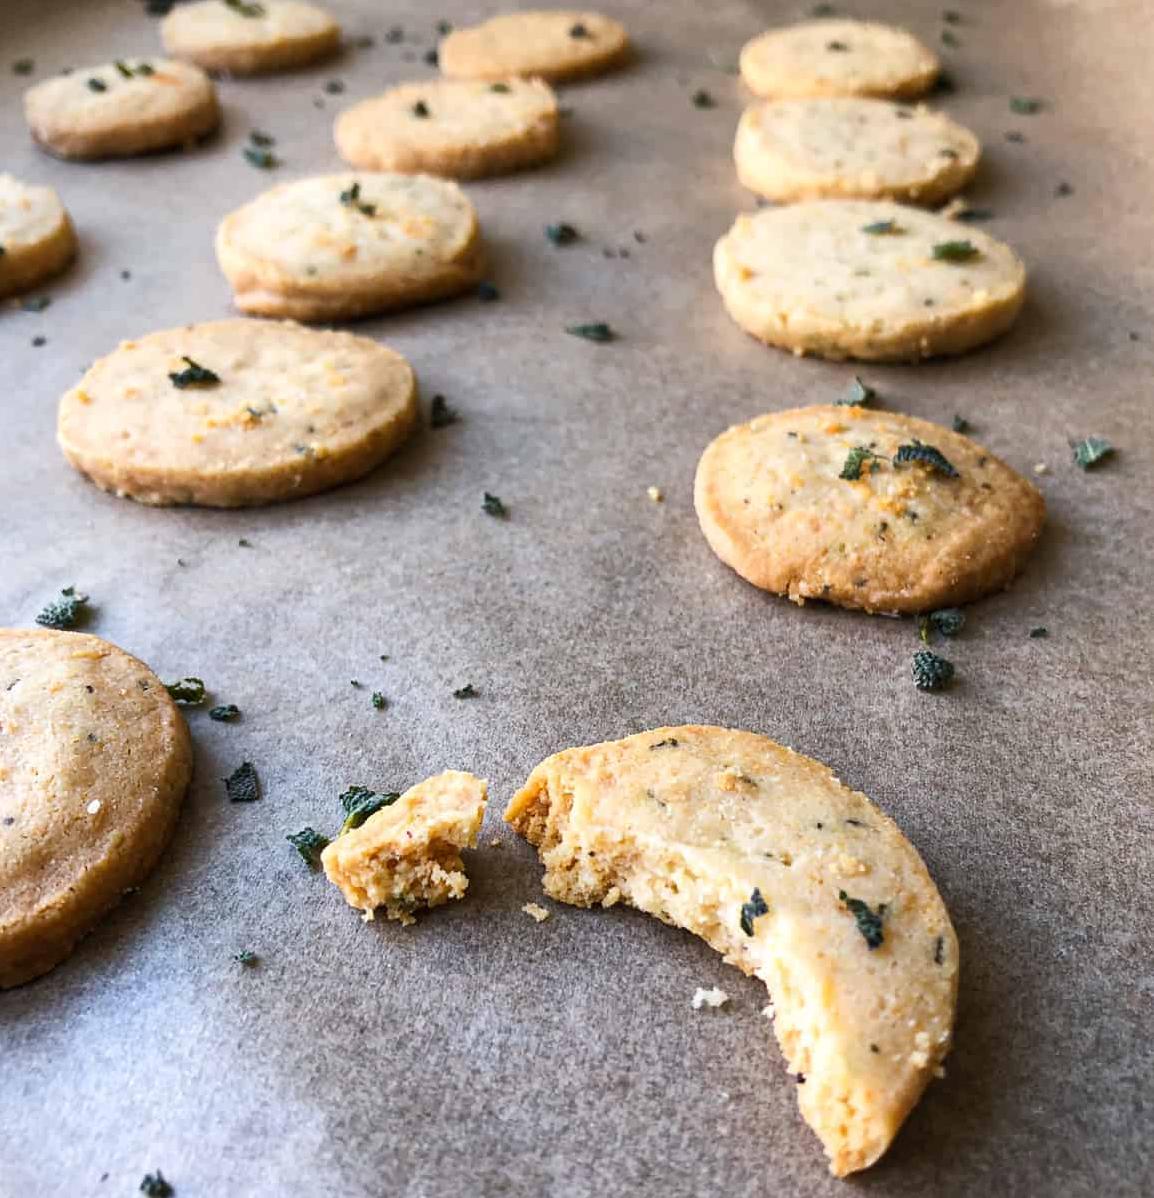  Crunchy, savory, and gluten-free, these crackers make the perfect snack!